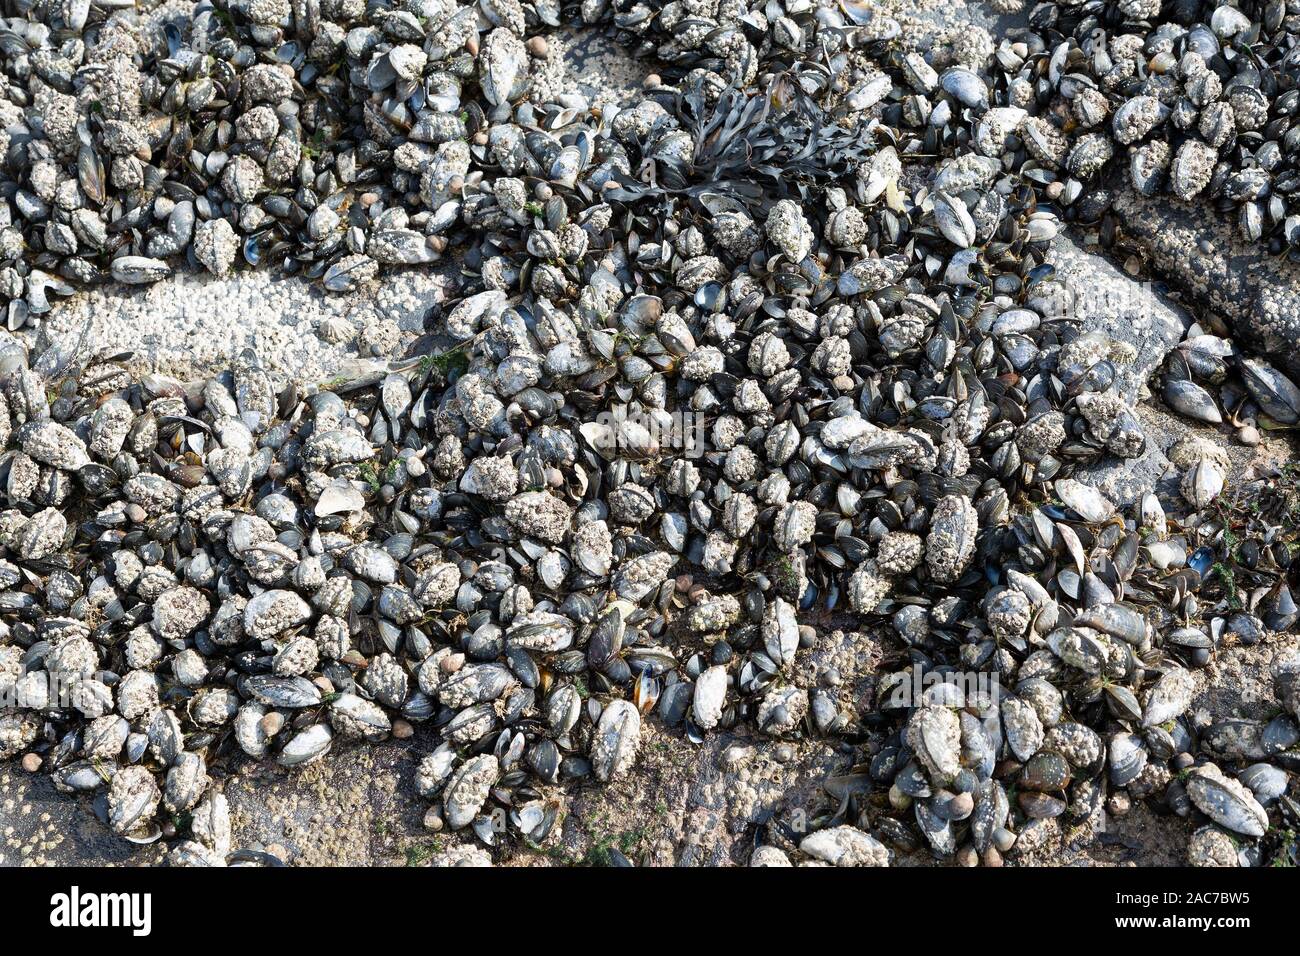 Mussels at low tide growing on rocks Stock Photo